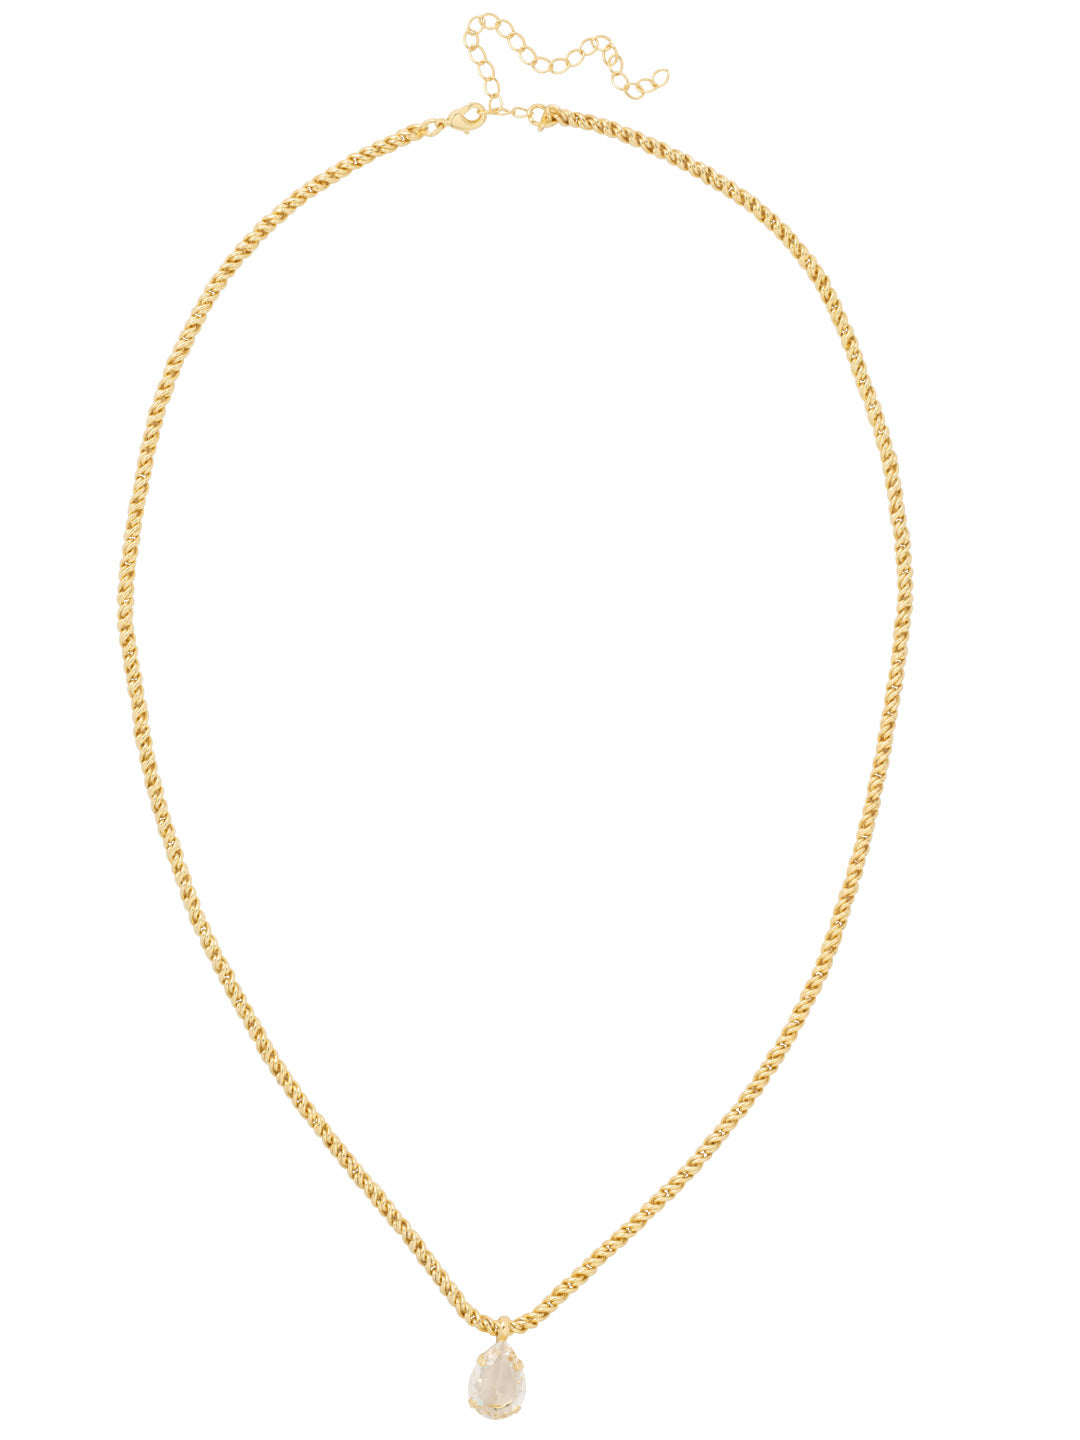 Eileen Long Necklace - NFM38BGCRY - <p>The Eileen Long Necklace features a pear cut crystal on a long adjustable rope chain, secured with a lobster claw clasp. From Sorrelli's Crystal collection in our Bright Gold-tone finish.</p>